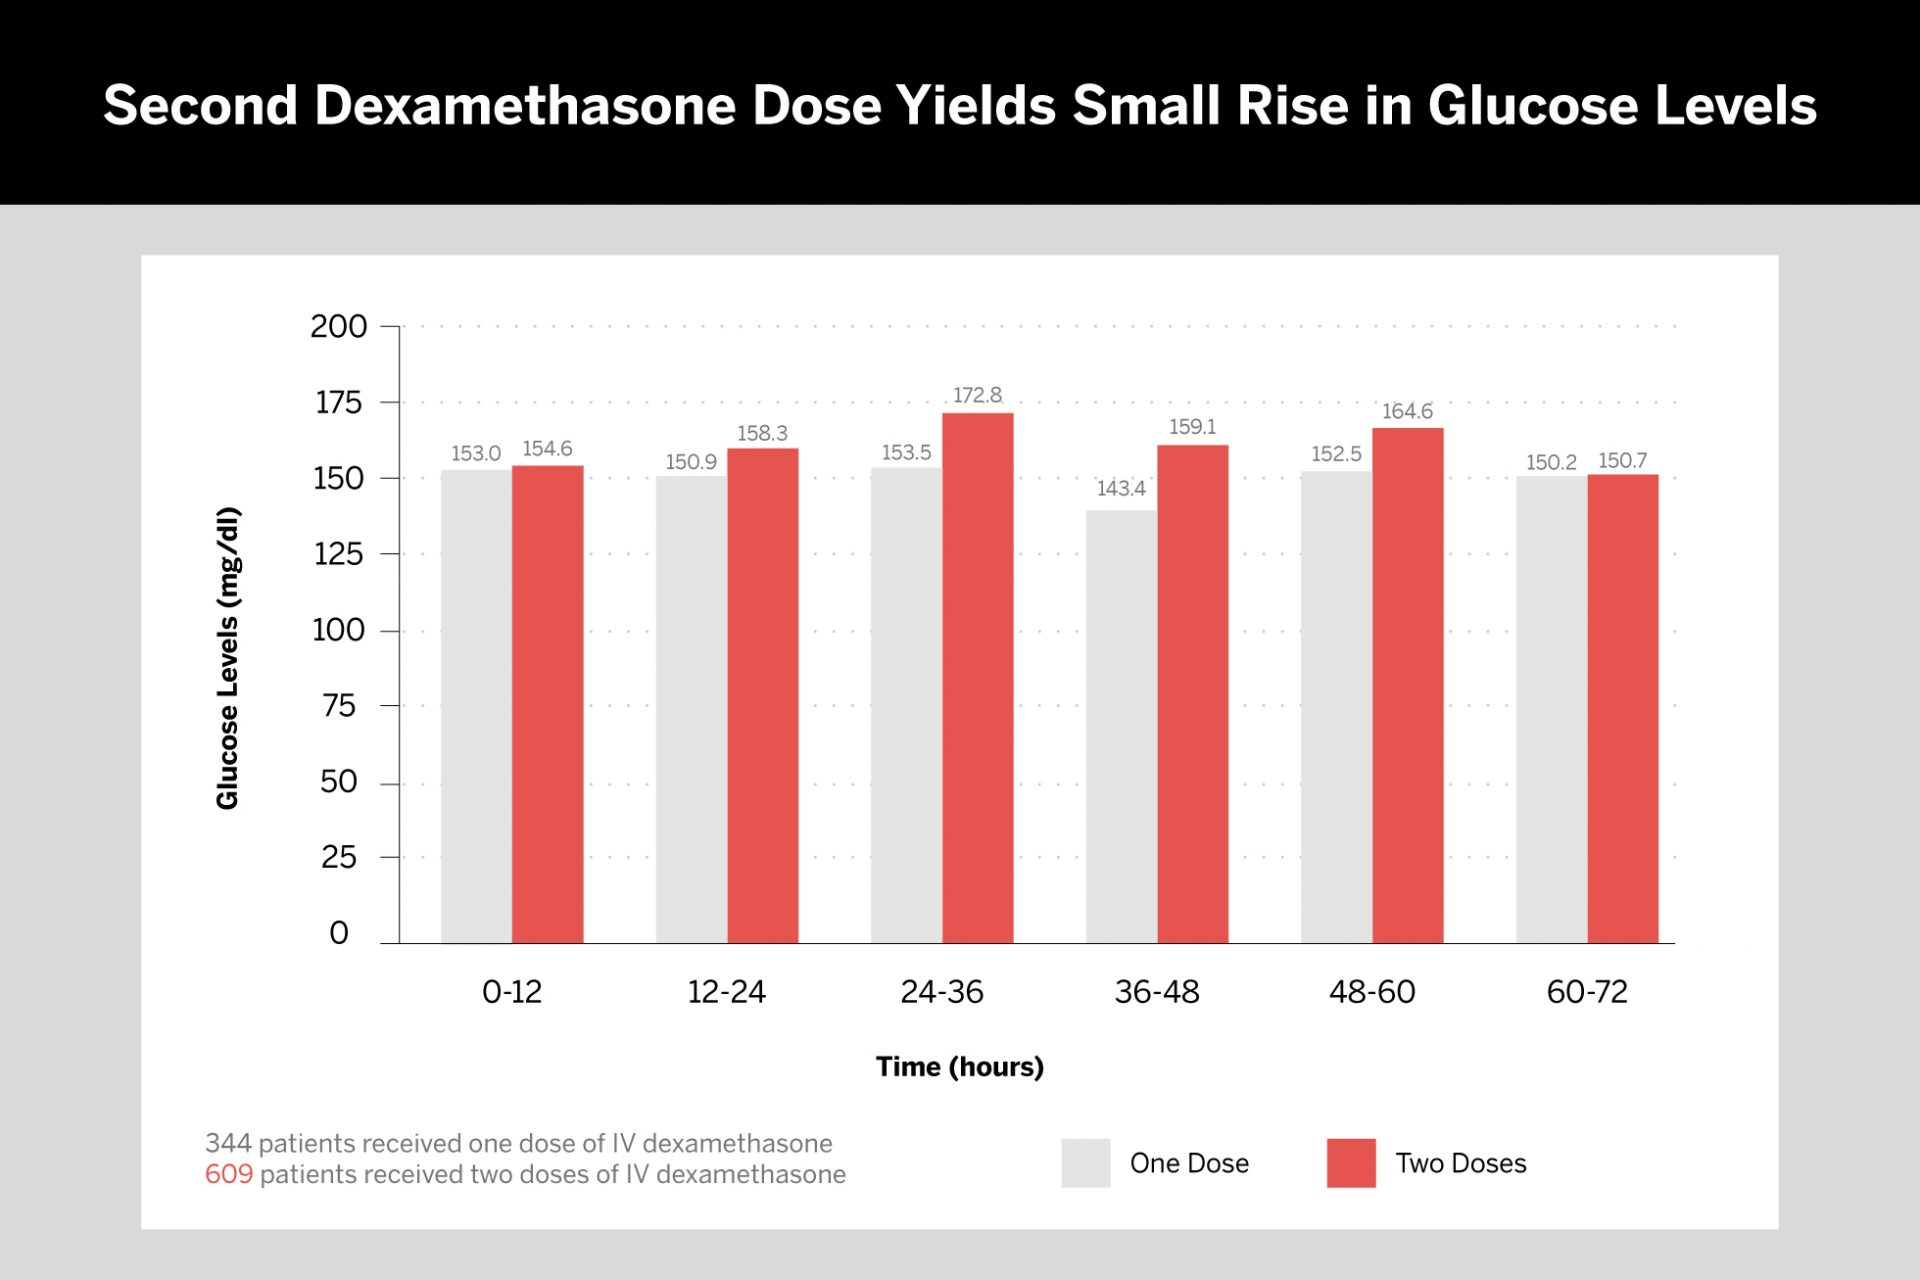 Second Dexamethasone Dose Yields Small Rise in Glucose Levels